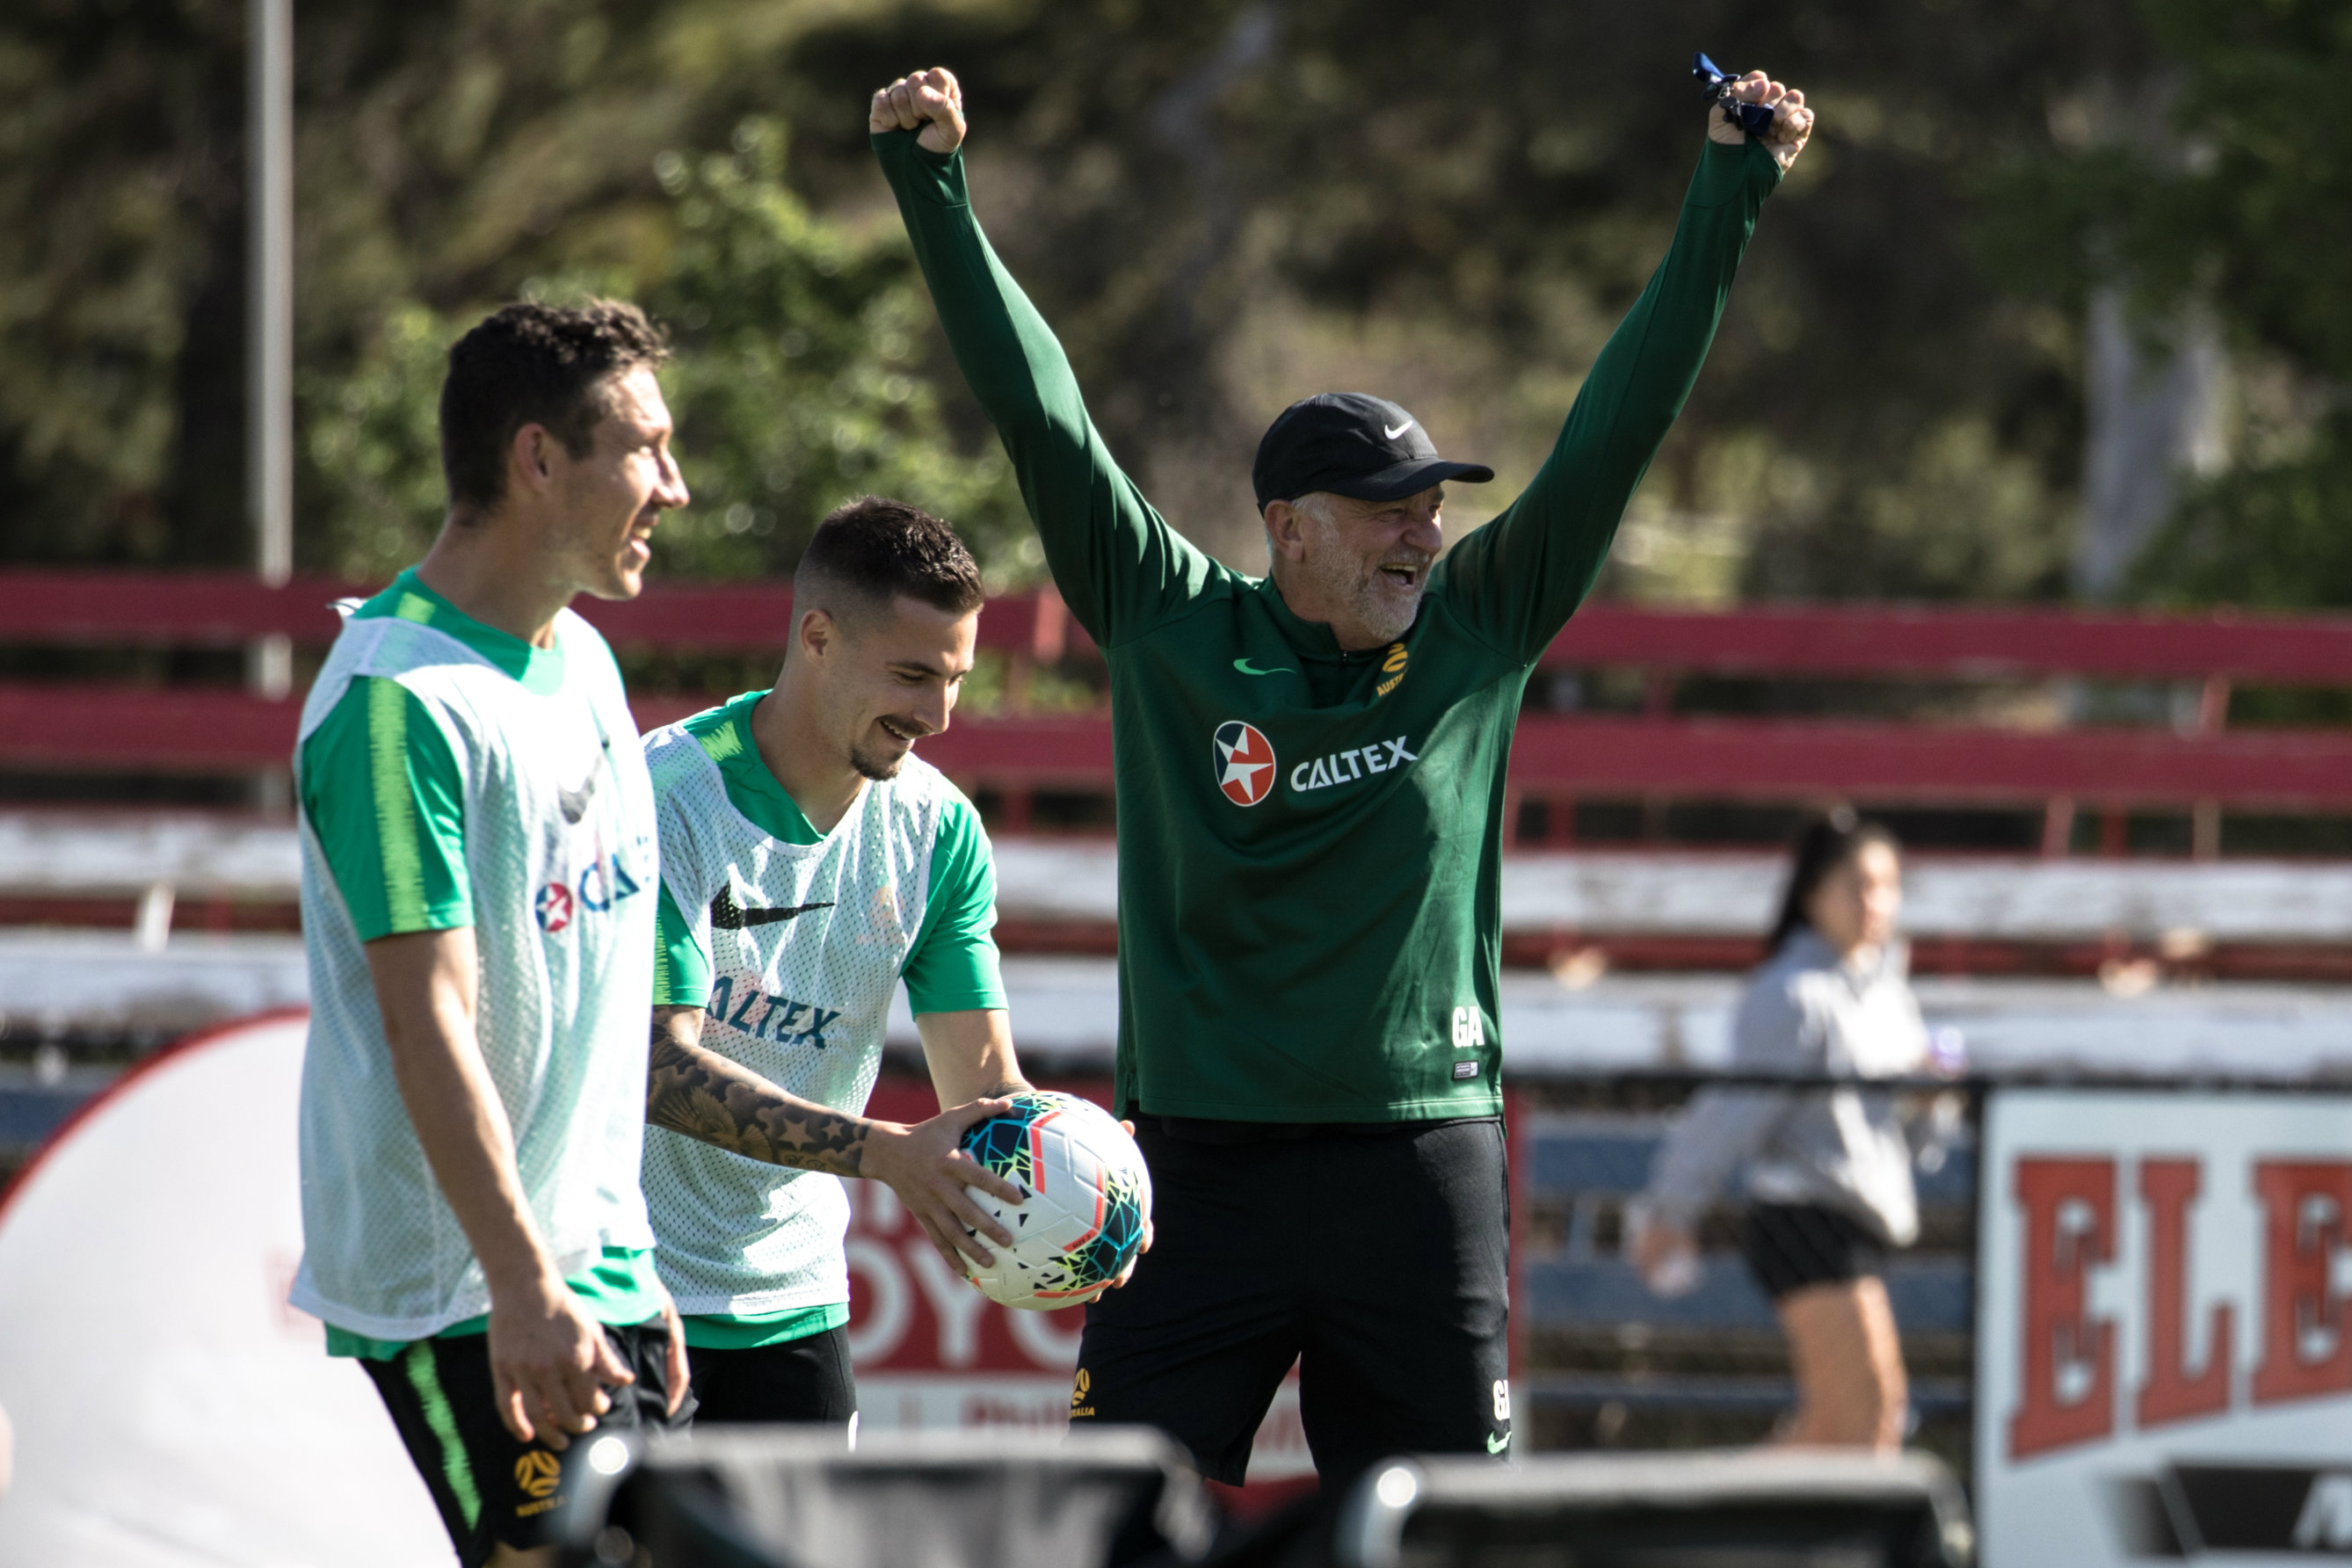 Caltex Socceroos training and fan day